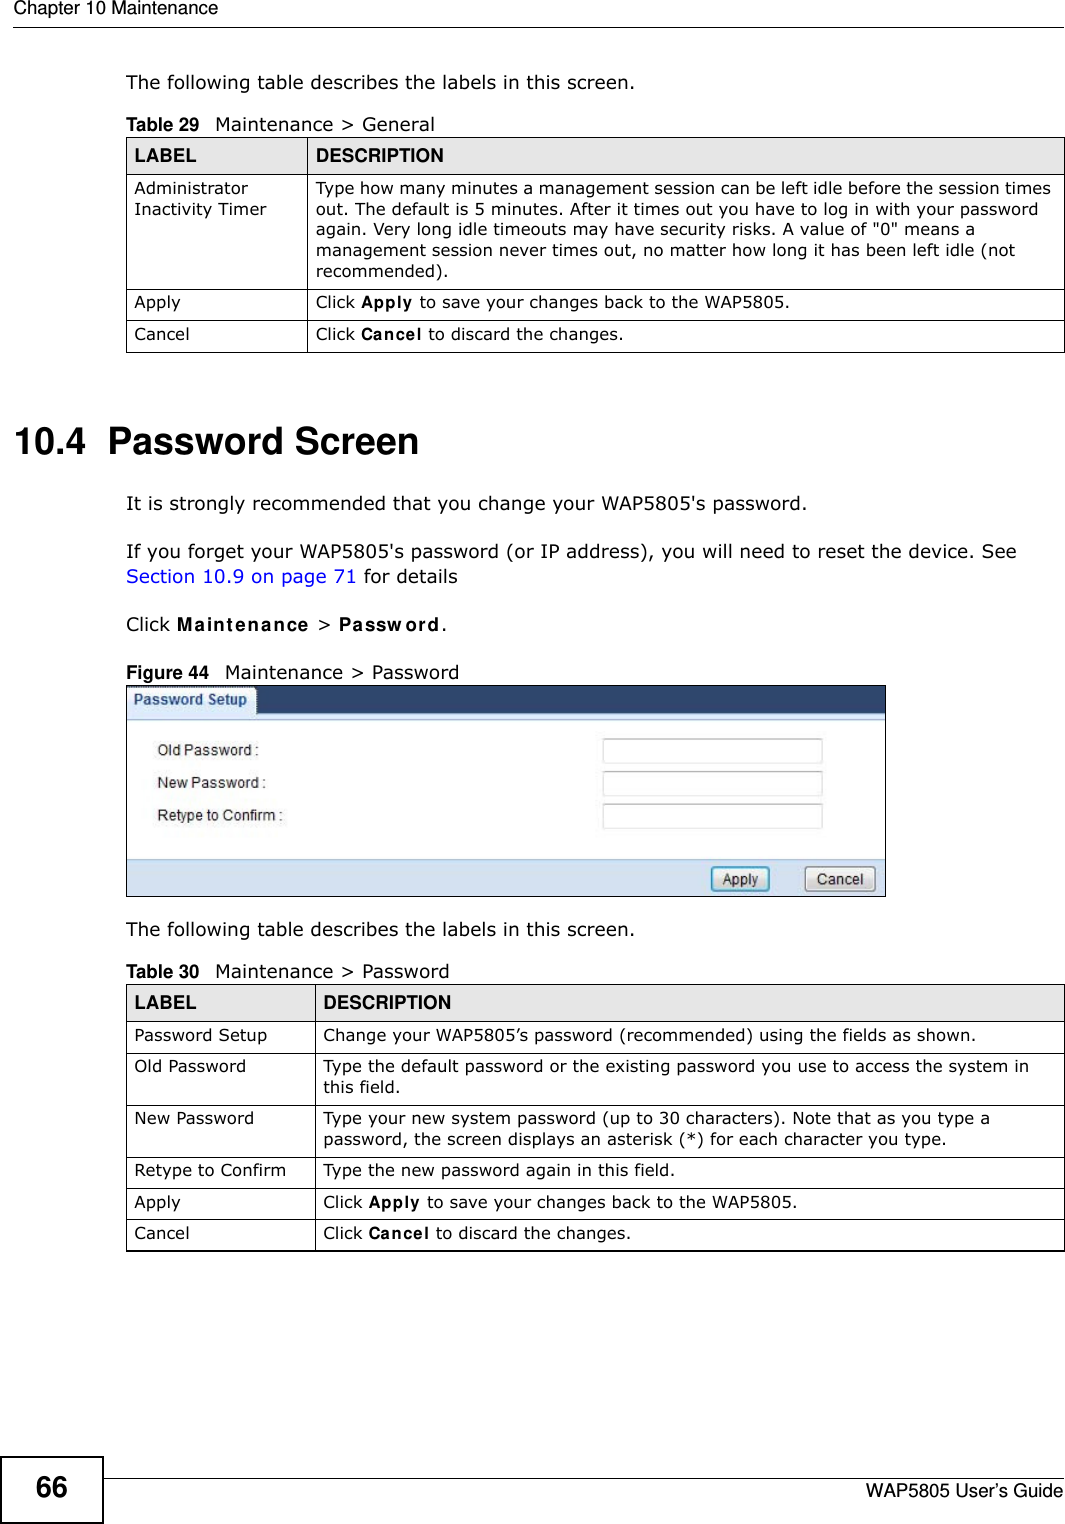 Chapter 10 MaintenanceWAP5805 User’s Guide66The following table describes the labels in this screen.10.4  Password Screen  It is strongly recommended that you change your WAP5805&apos;s password.  If you forget your WAP5805&apos;s password (or IP address), you will need to reset the device. See Section 10.9 on page 71 for detailsClick Maintenance &gt; Password.Figure 44   Maintenance &gt; Password The following table describes the labels in this screen.Table 29   Maintenance &gt; GeneralLABEL DESCRIPTIONAdministrator Inactivity TimerType how many minutes a management session can be left idle before the session times out. The default is 5 minutes. After it times out you have to log in with your password again. Very long idle timeouts may have security risks. A value of &quot;0&quot; means a management session never times out, no matter how long it has been left idle (not recommended).Apply Click Apply to save your changes back to the WAP5805.Cancel Click Cancel to discard the changes.Table 30   Maintenance &gt; PasswordLABEL DESCRIPTIONPassword Setup Change your WAP5805’s password (recommended) using the fields as shown.Old Password Type the default password or the existing password you use to access the system in this field.New Password Type your new system password (up to 30 characters). Note that as you type a password, the screen displays an asterisk (*) for each character you type.Retype to Confirm Type the new password again in this field.Apply Click Apply to save your changes back to the WAP5805.Cancel Click Cancel to discard the changes.